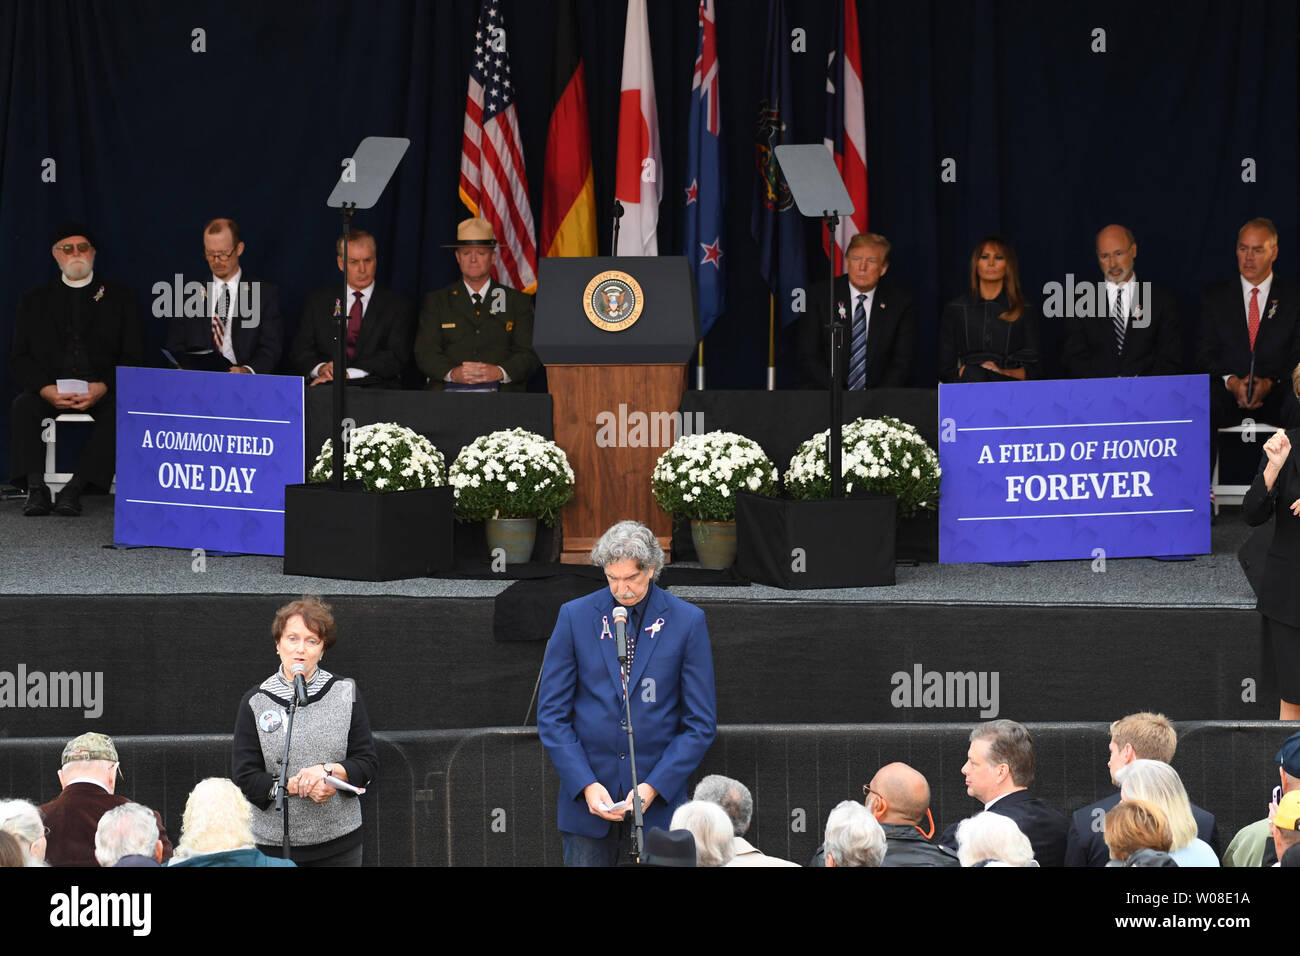 The names of those who died on Flight 93 are read at a ceremony marking the anniversary of 9/11 at the Flight 93 National Memorial in Shanksville, Pennsylvania on Tuesday, September 11, 2018. President Trump and the First Lady attended the ceremony marking the 17th anniversary of the crash of United Flight 93 on September 11, 2001.                    Photo by Pat Benic/UP9 Stock Photo